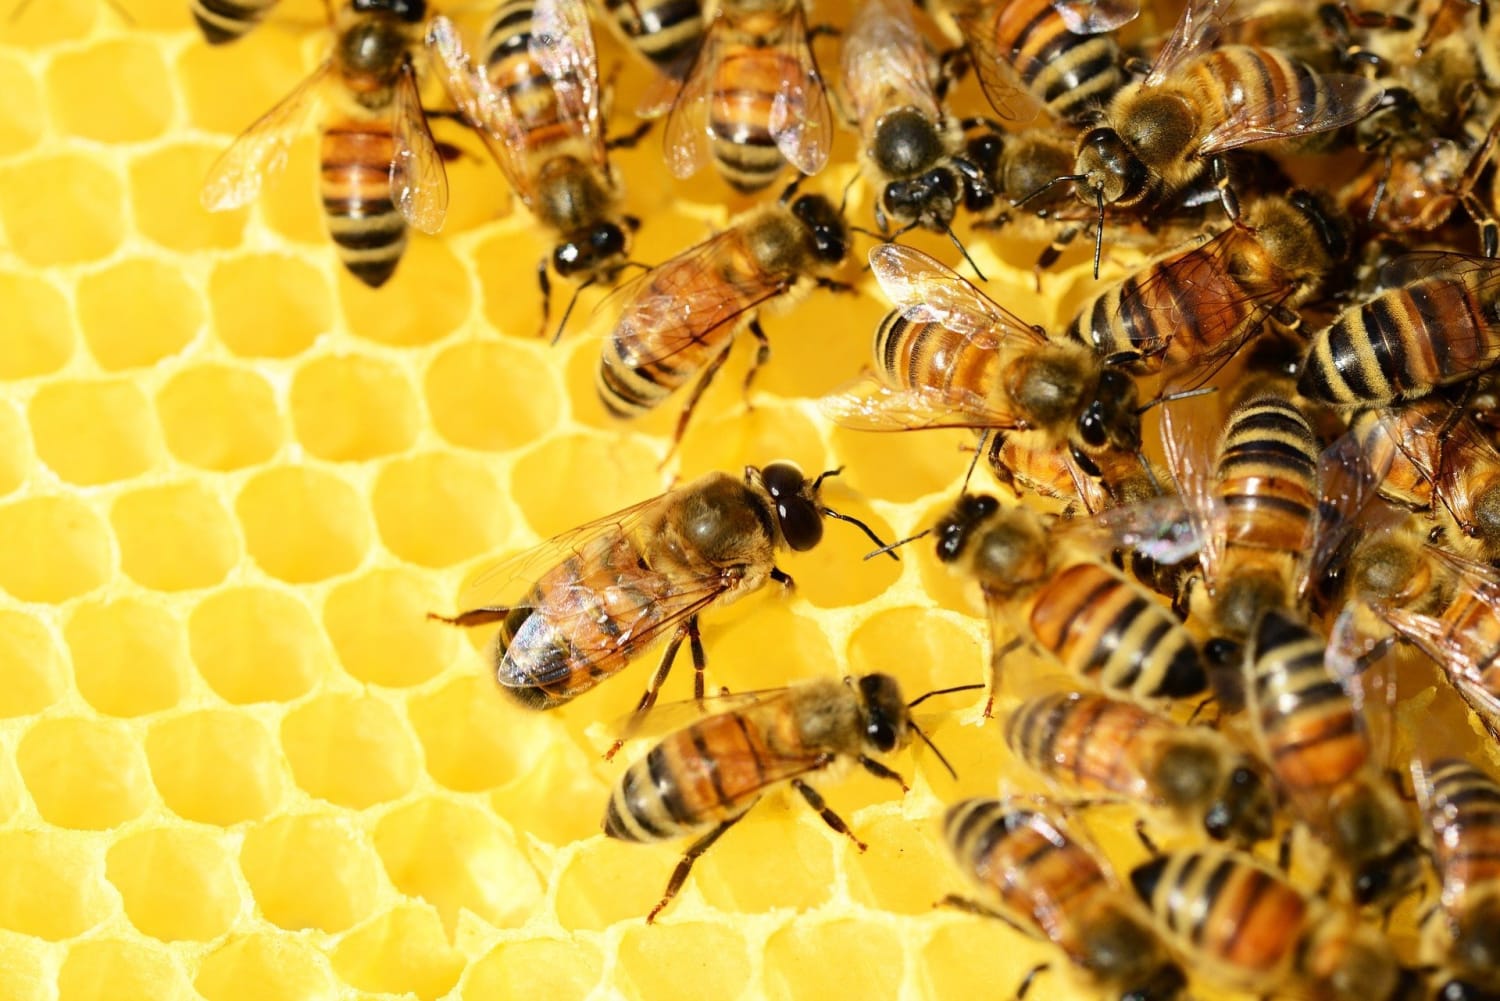 South African worker honeybees reproduce by making near-perfect clones of themselves